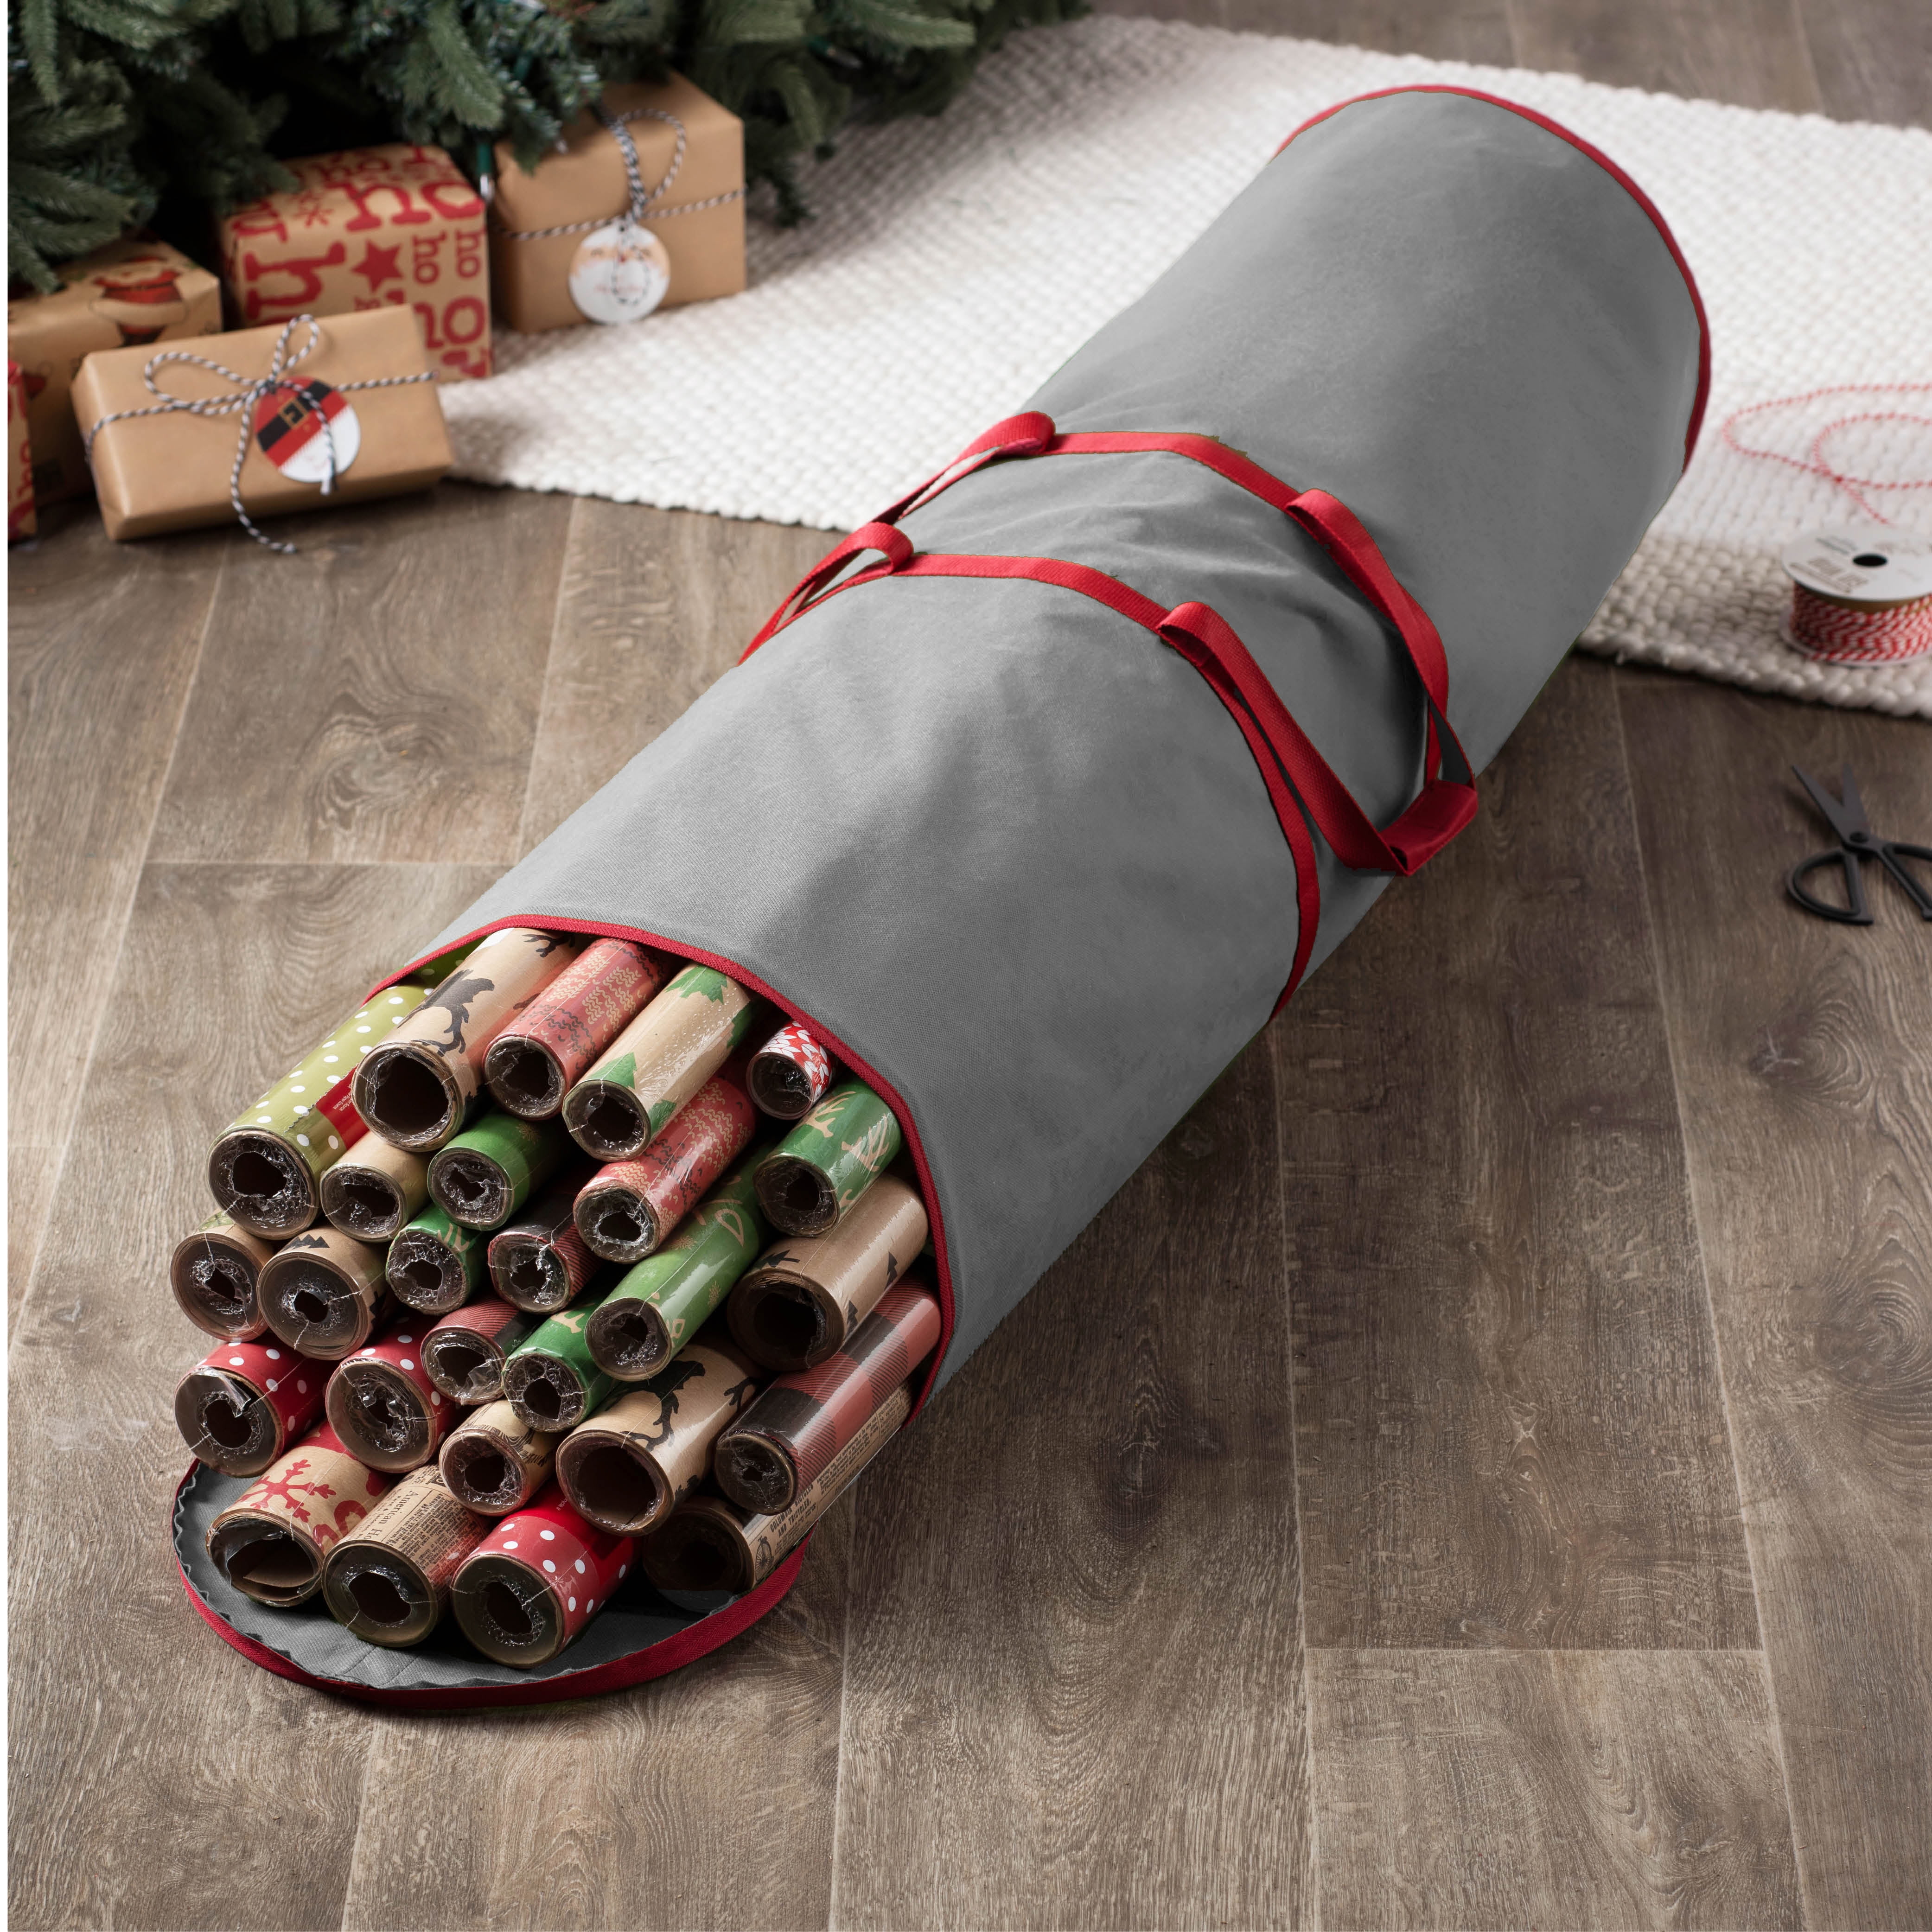 Wrapping Paper Organizer - Holds 20 Rolls of 30-Inch Christmas or